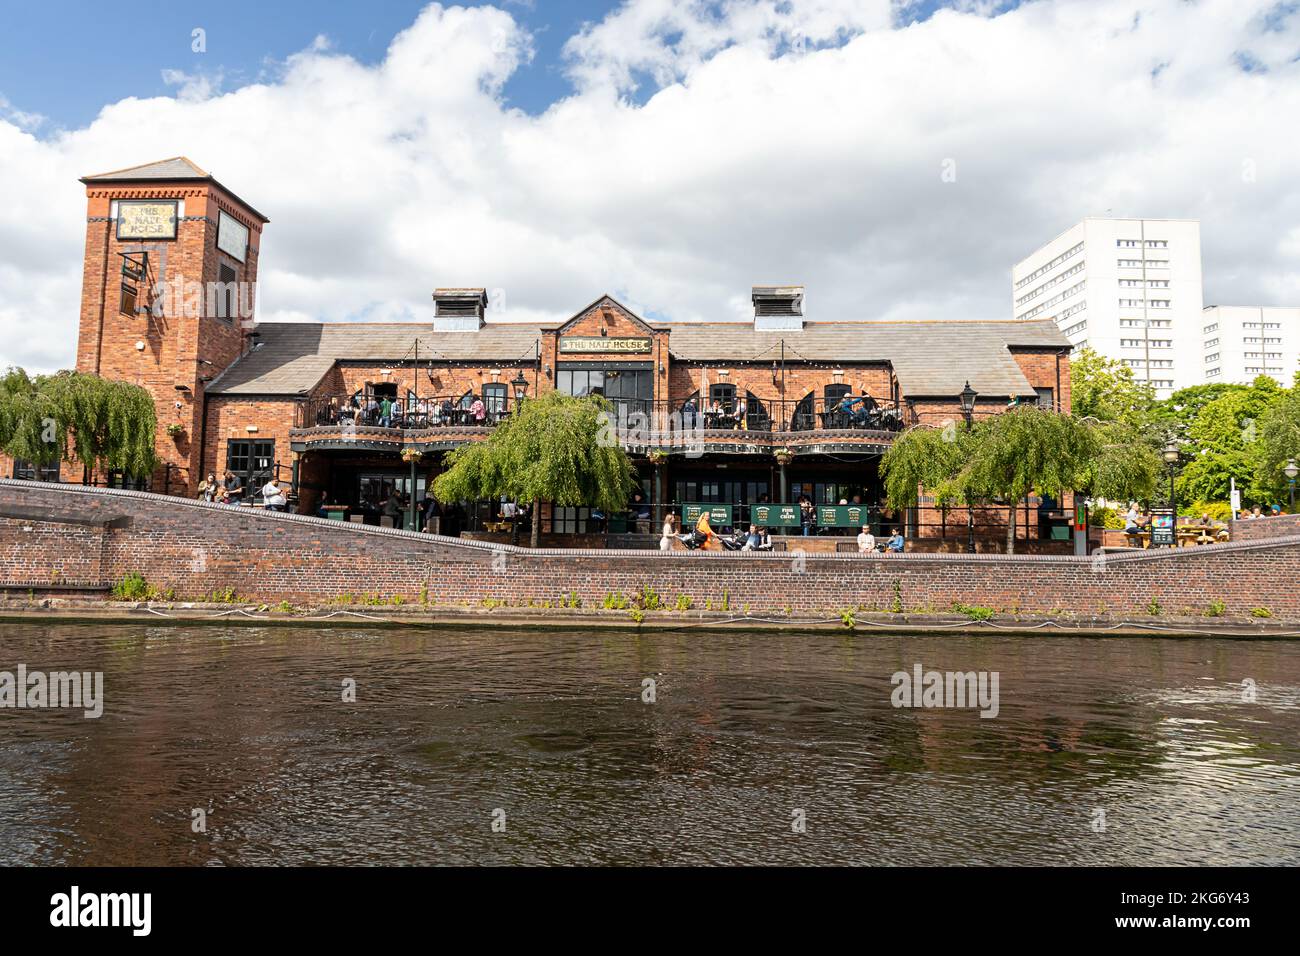 June 12, 2022 Birmingham West Midlands Great Britain. Architecture of the city. Stock Photo